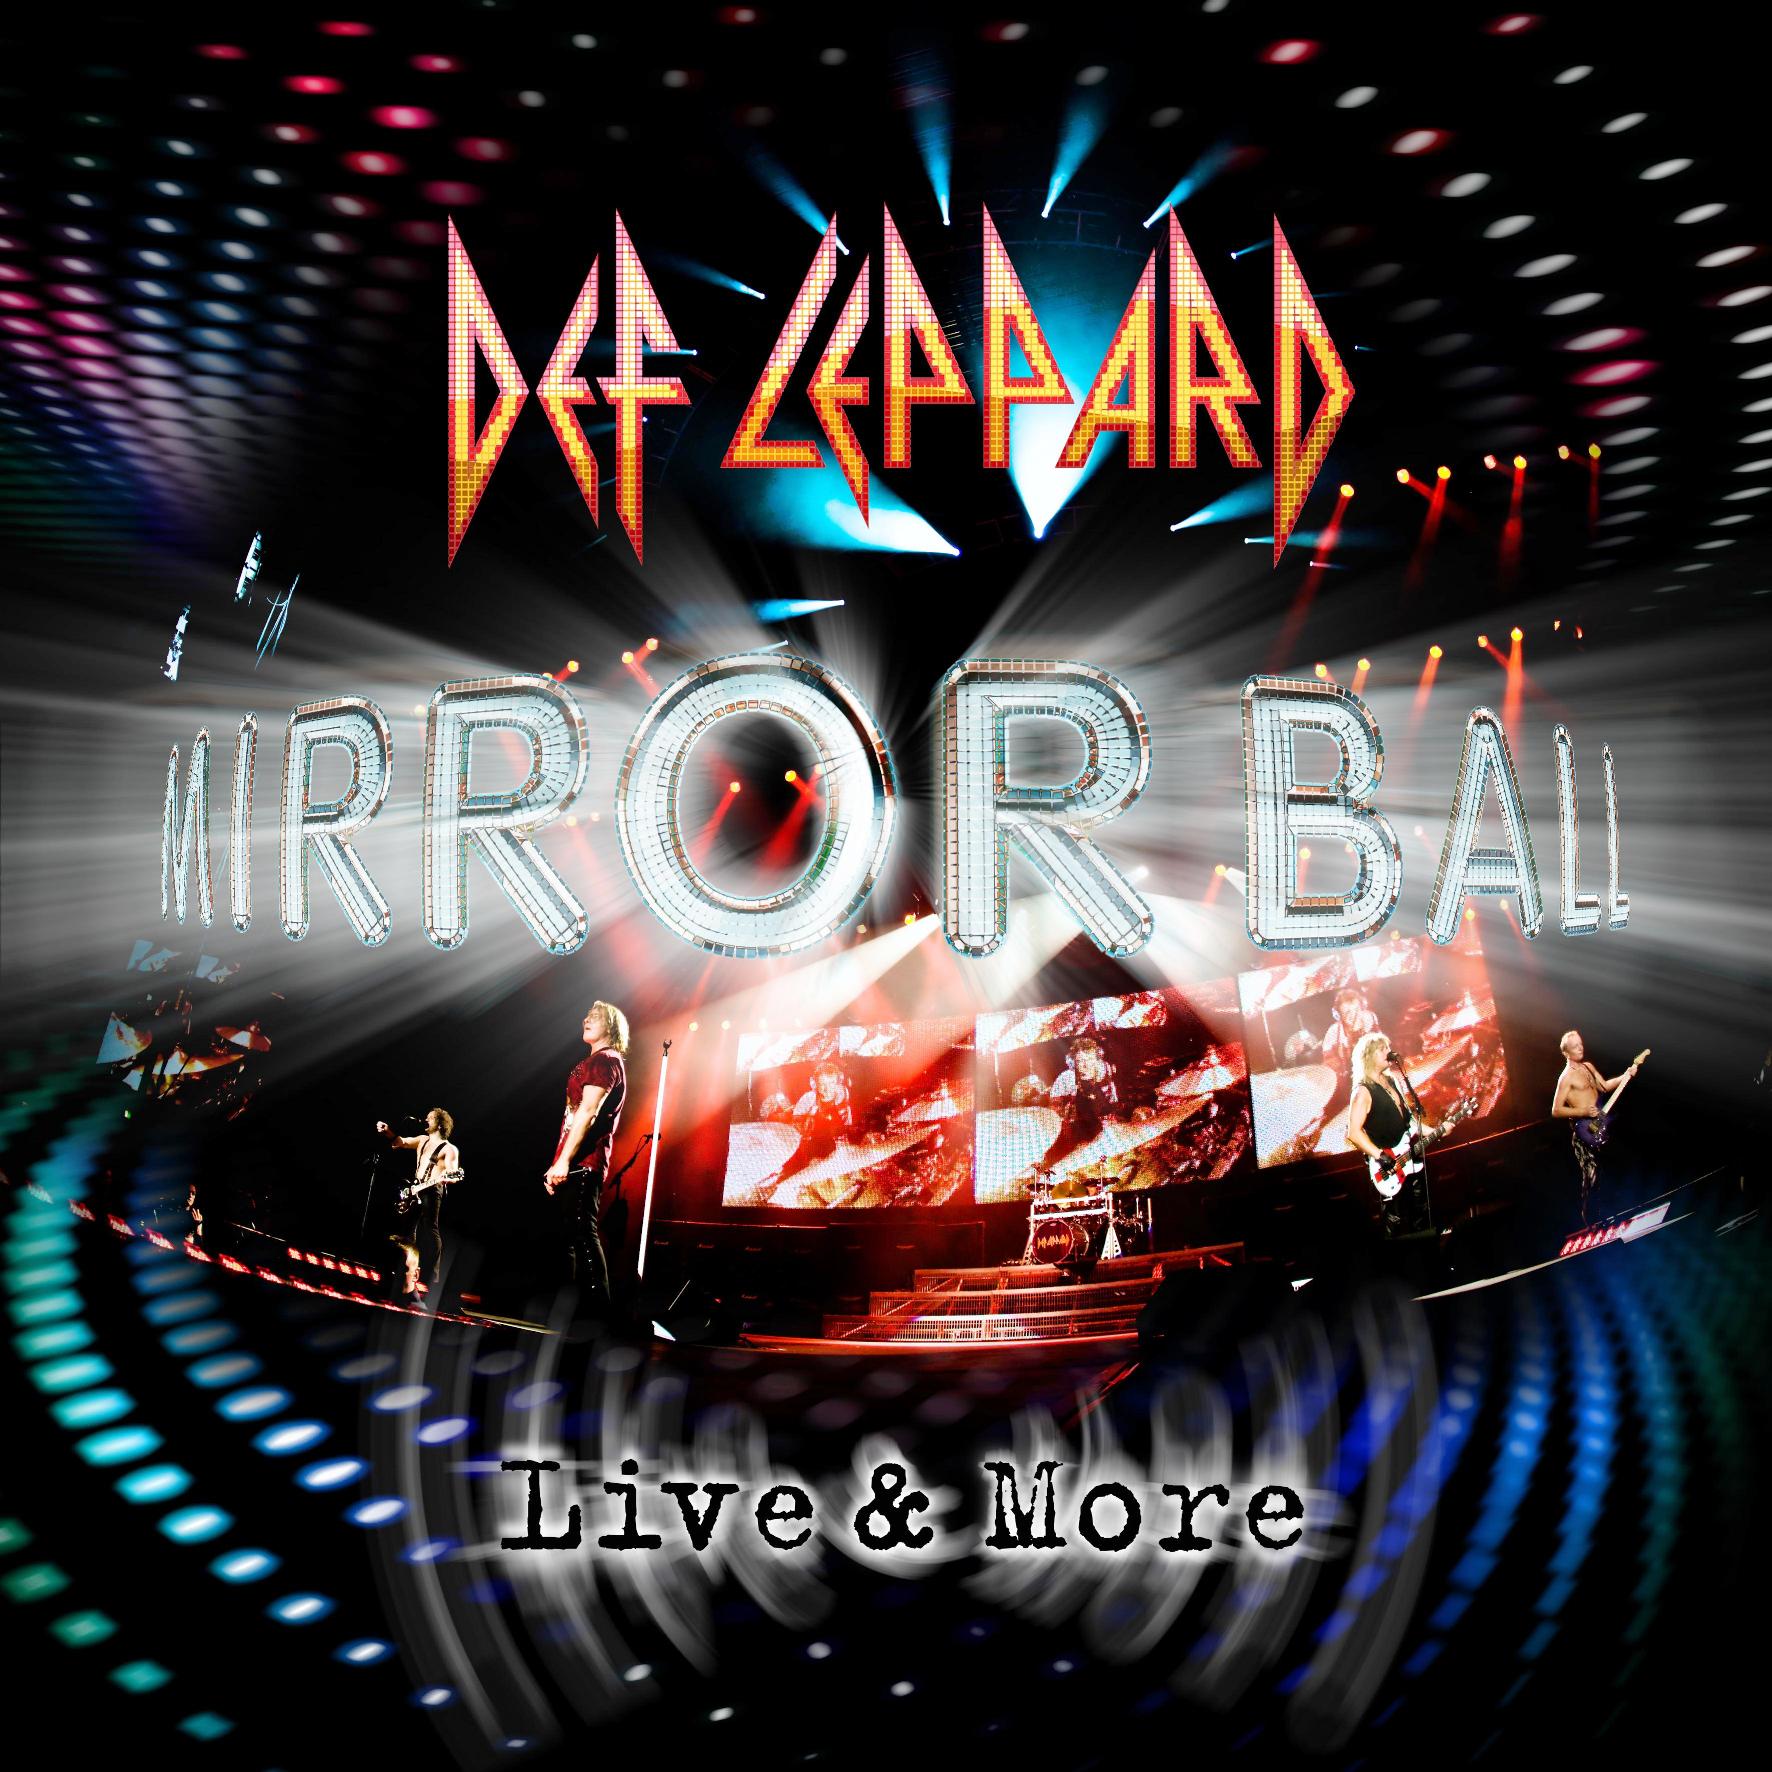 Def Leppard, Mirrorball, Live & More, Cover